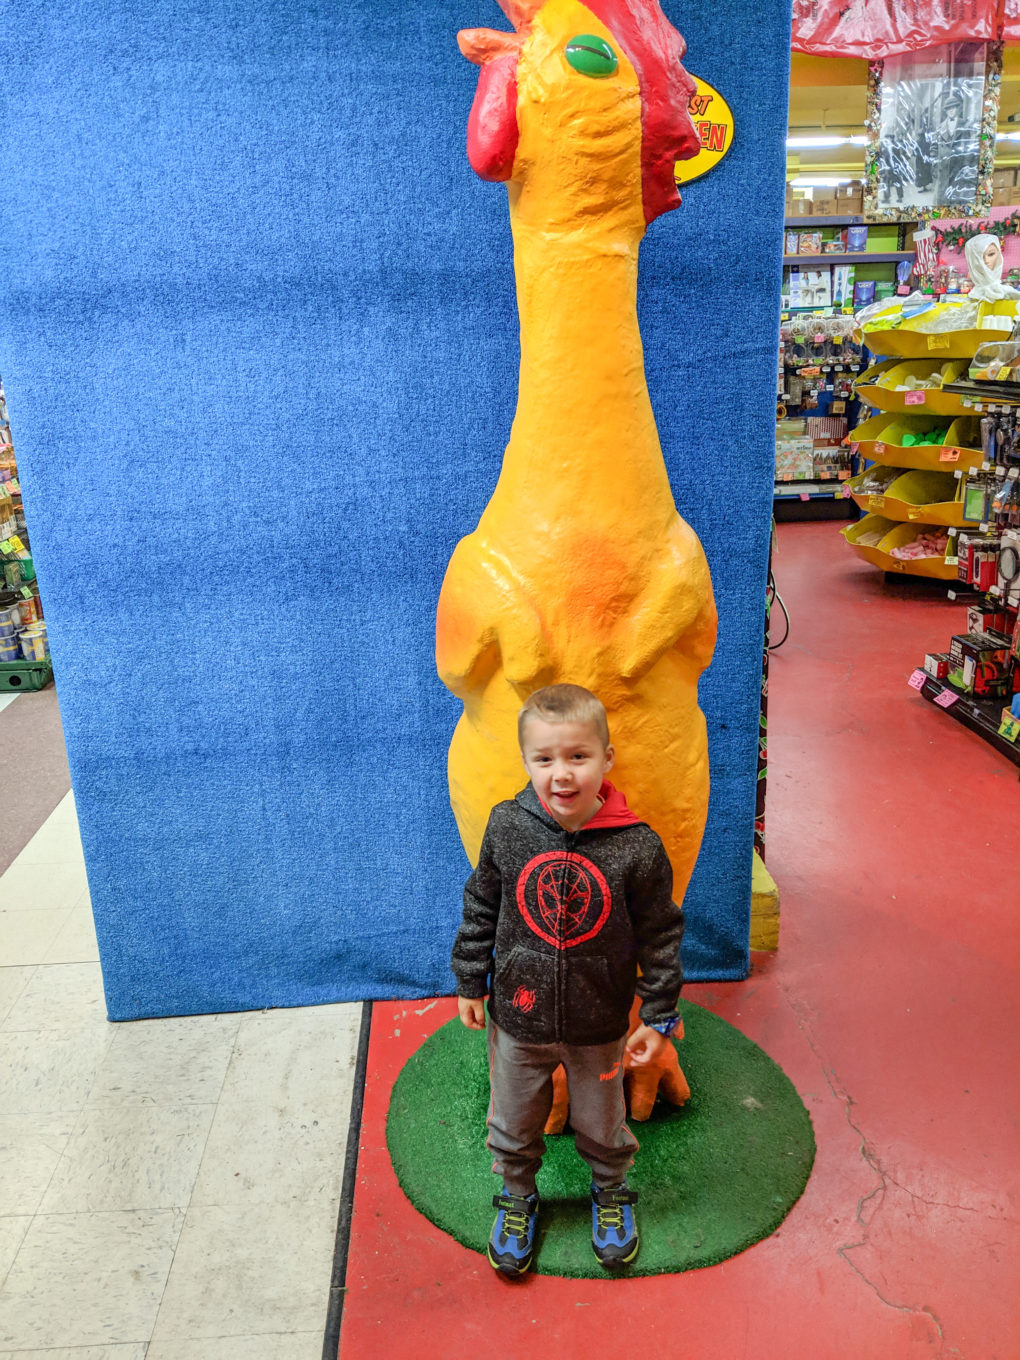 Archie McPhee - How to visit Seattle with kids on a 3 day trip. Fun activities to do.